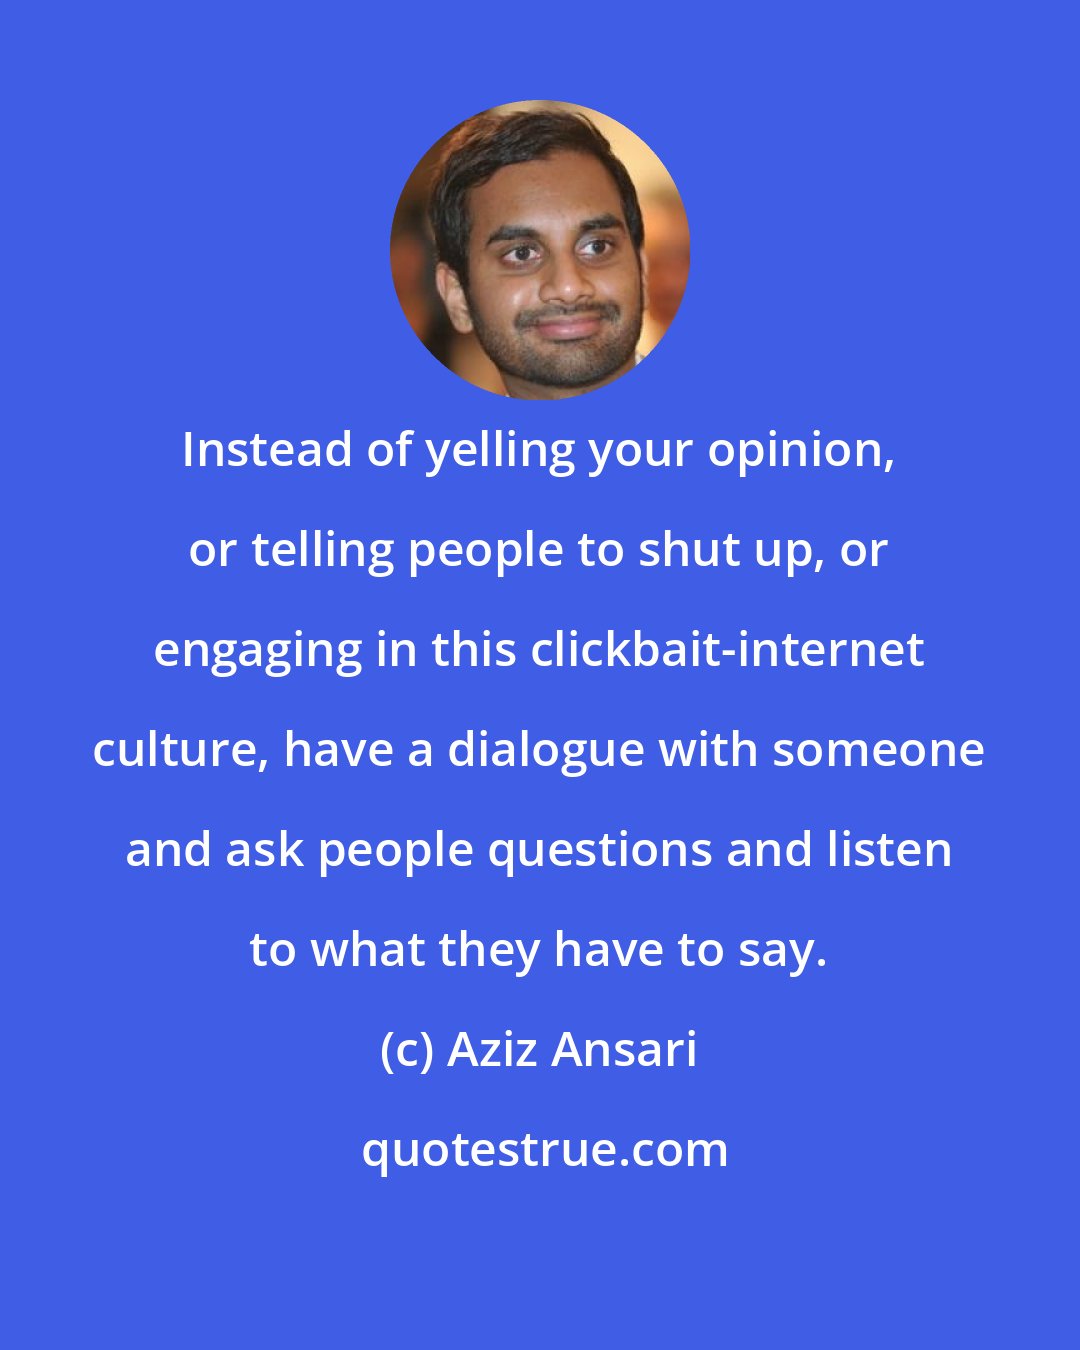 Aziz Ansari: Instead of yelling your opinion, or telling people to shut up, or engaging in this clickbait-internet culture, have a dialogue with someone and ask people questions and listen to what they have to say.